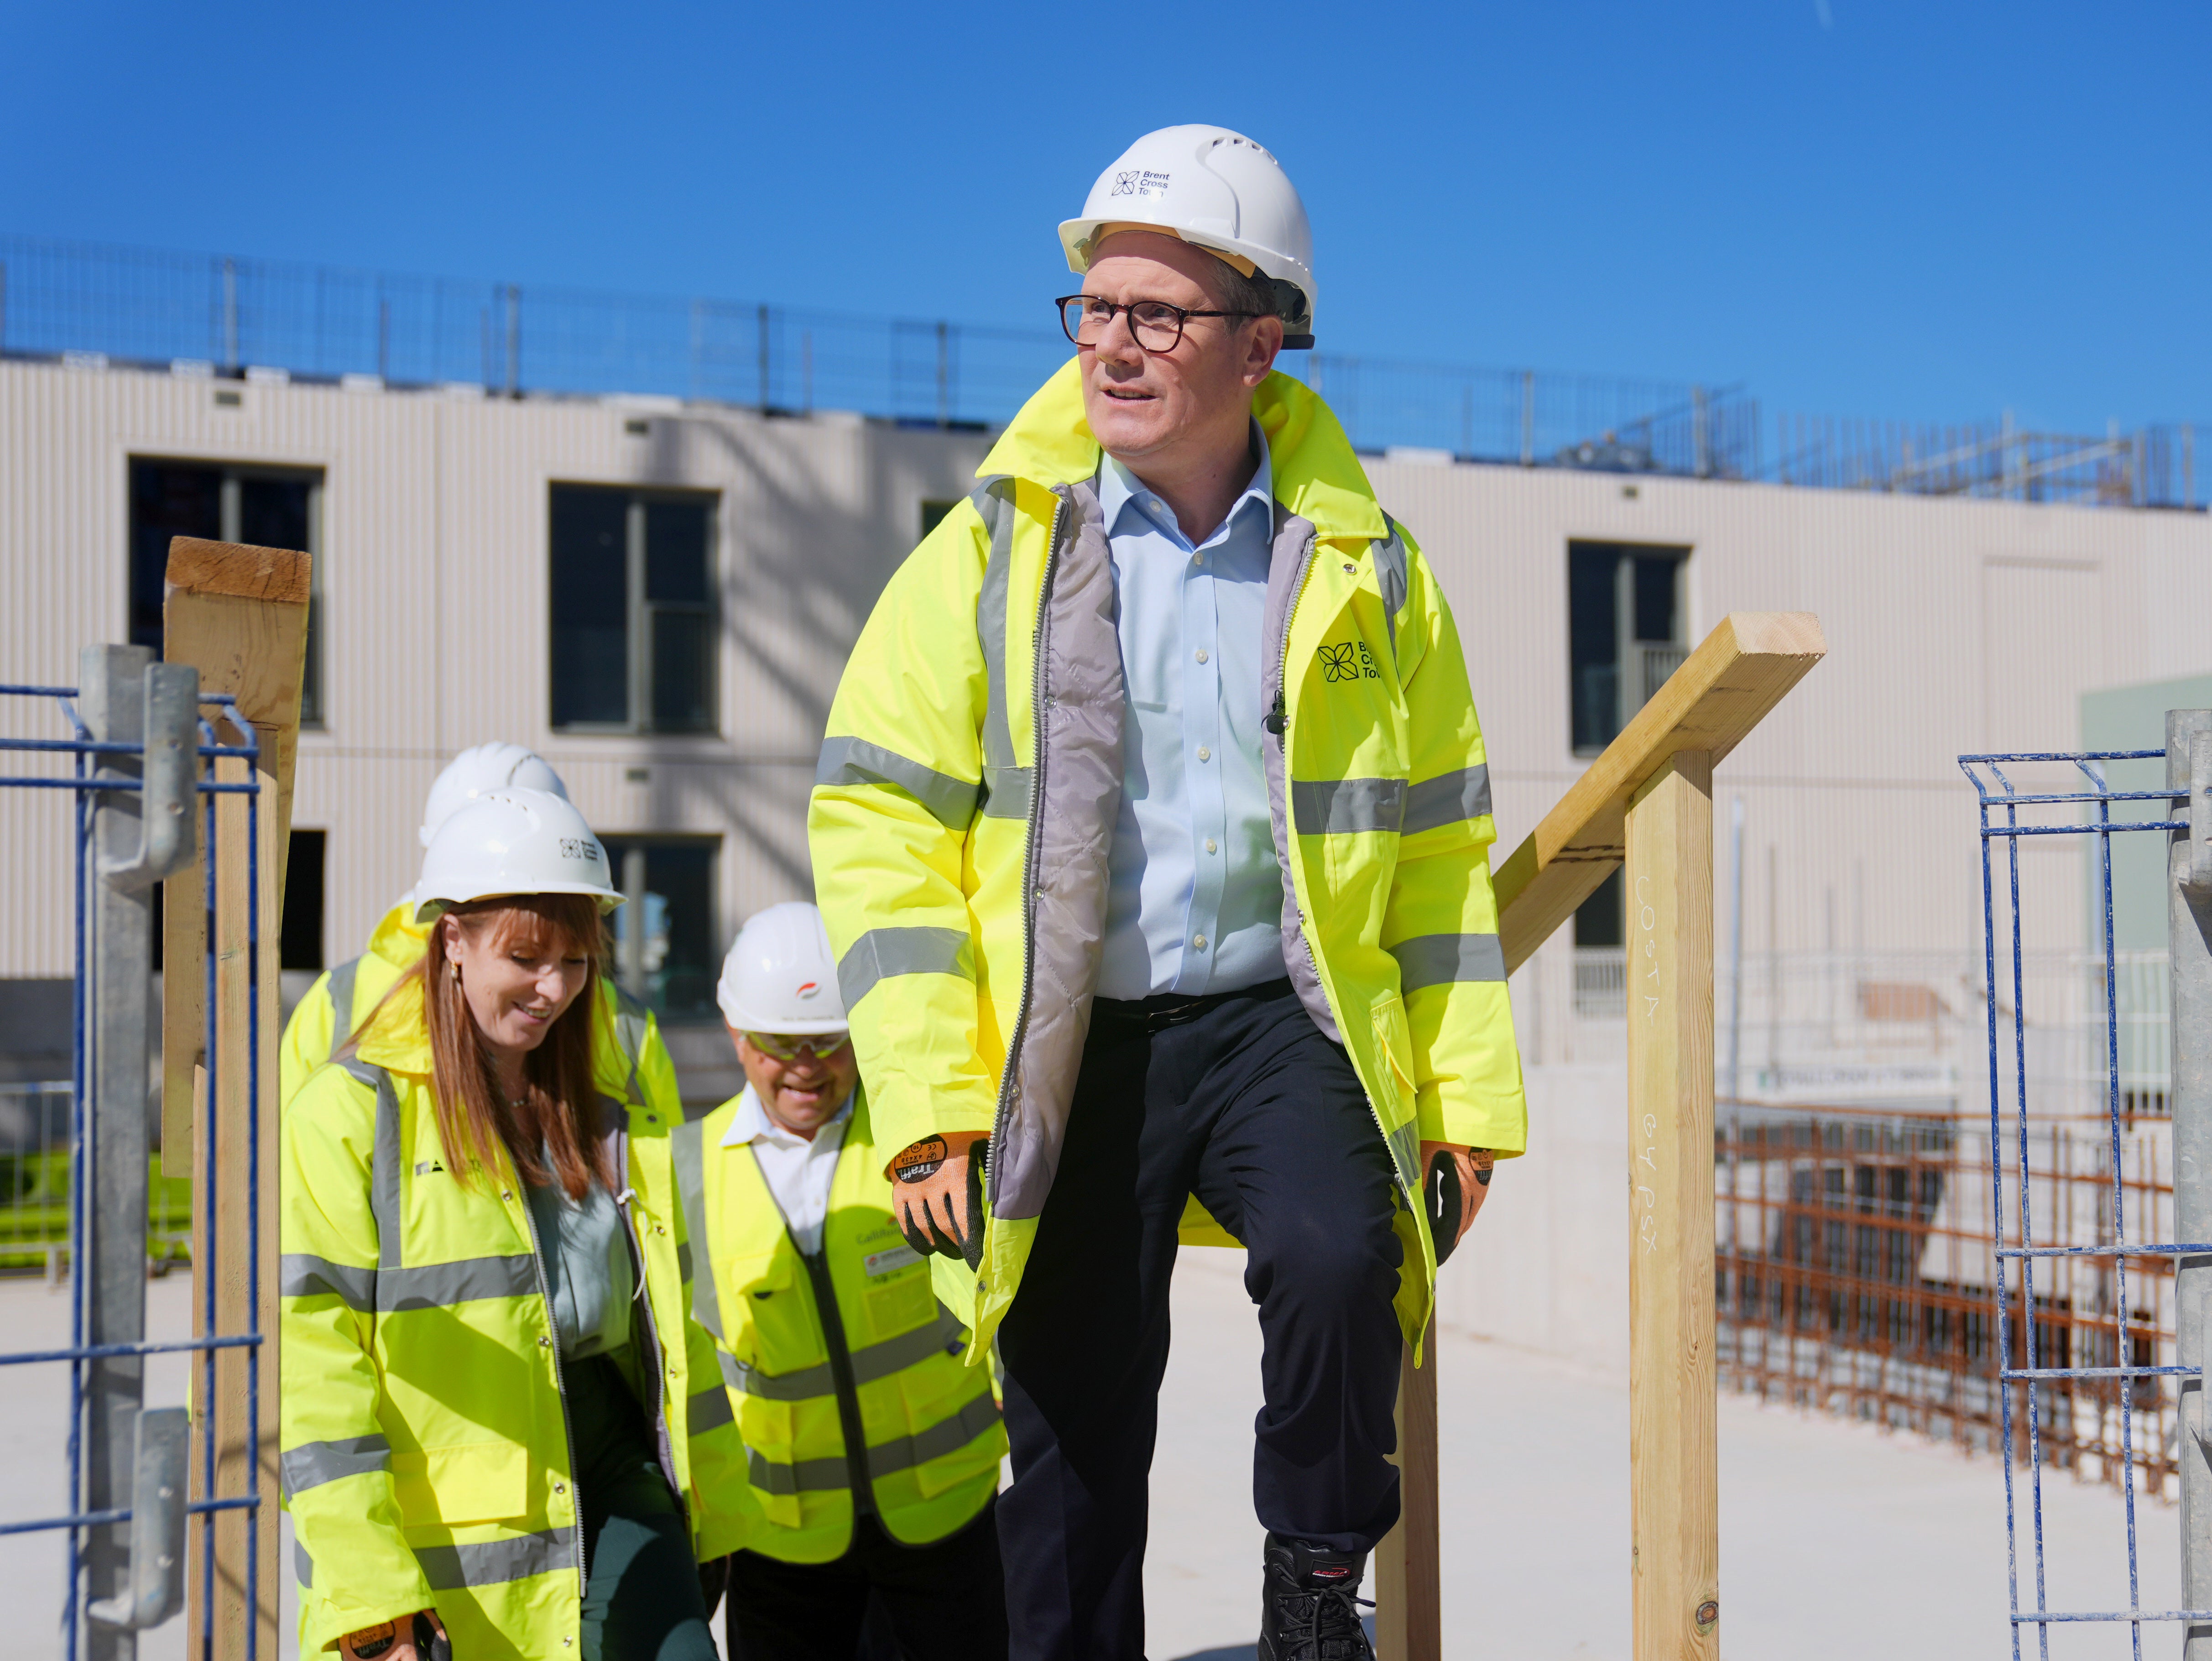 Keir Starmer’s Labour party have pledged to increase the social housing stock